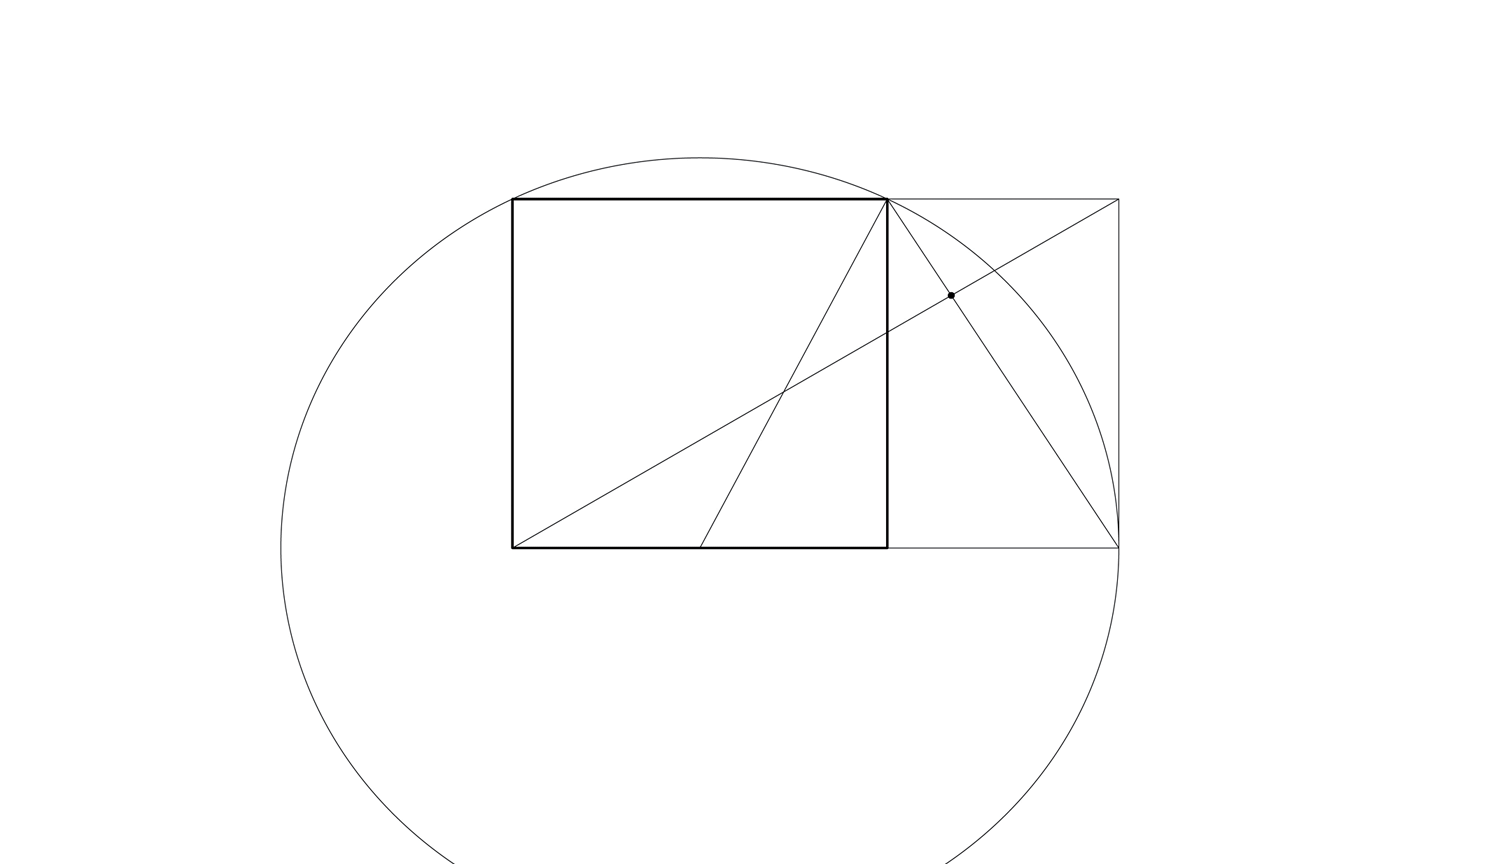 Geometry-Diagram_sized-for-project-page.gif